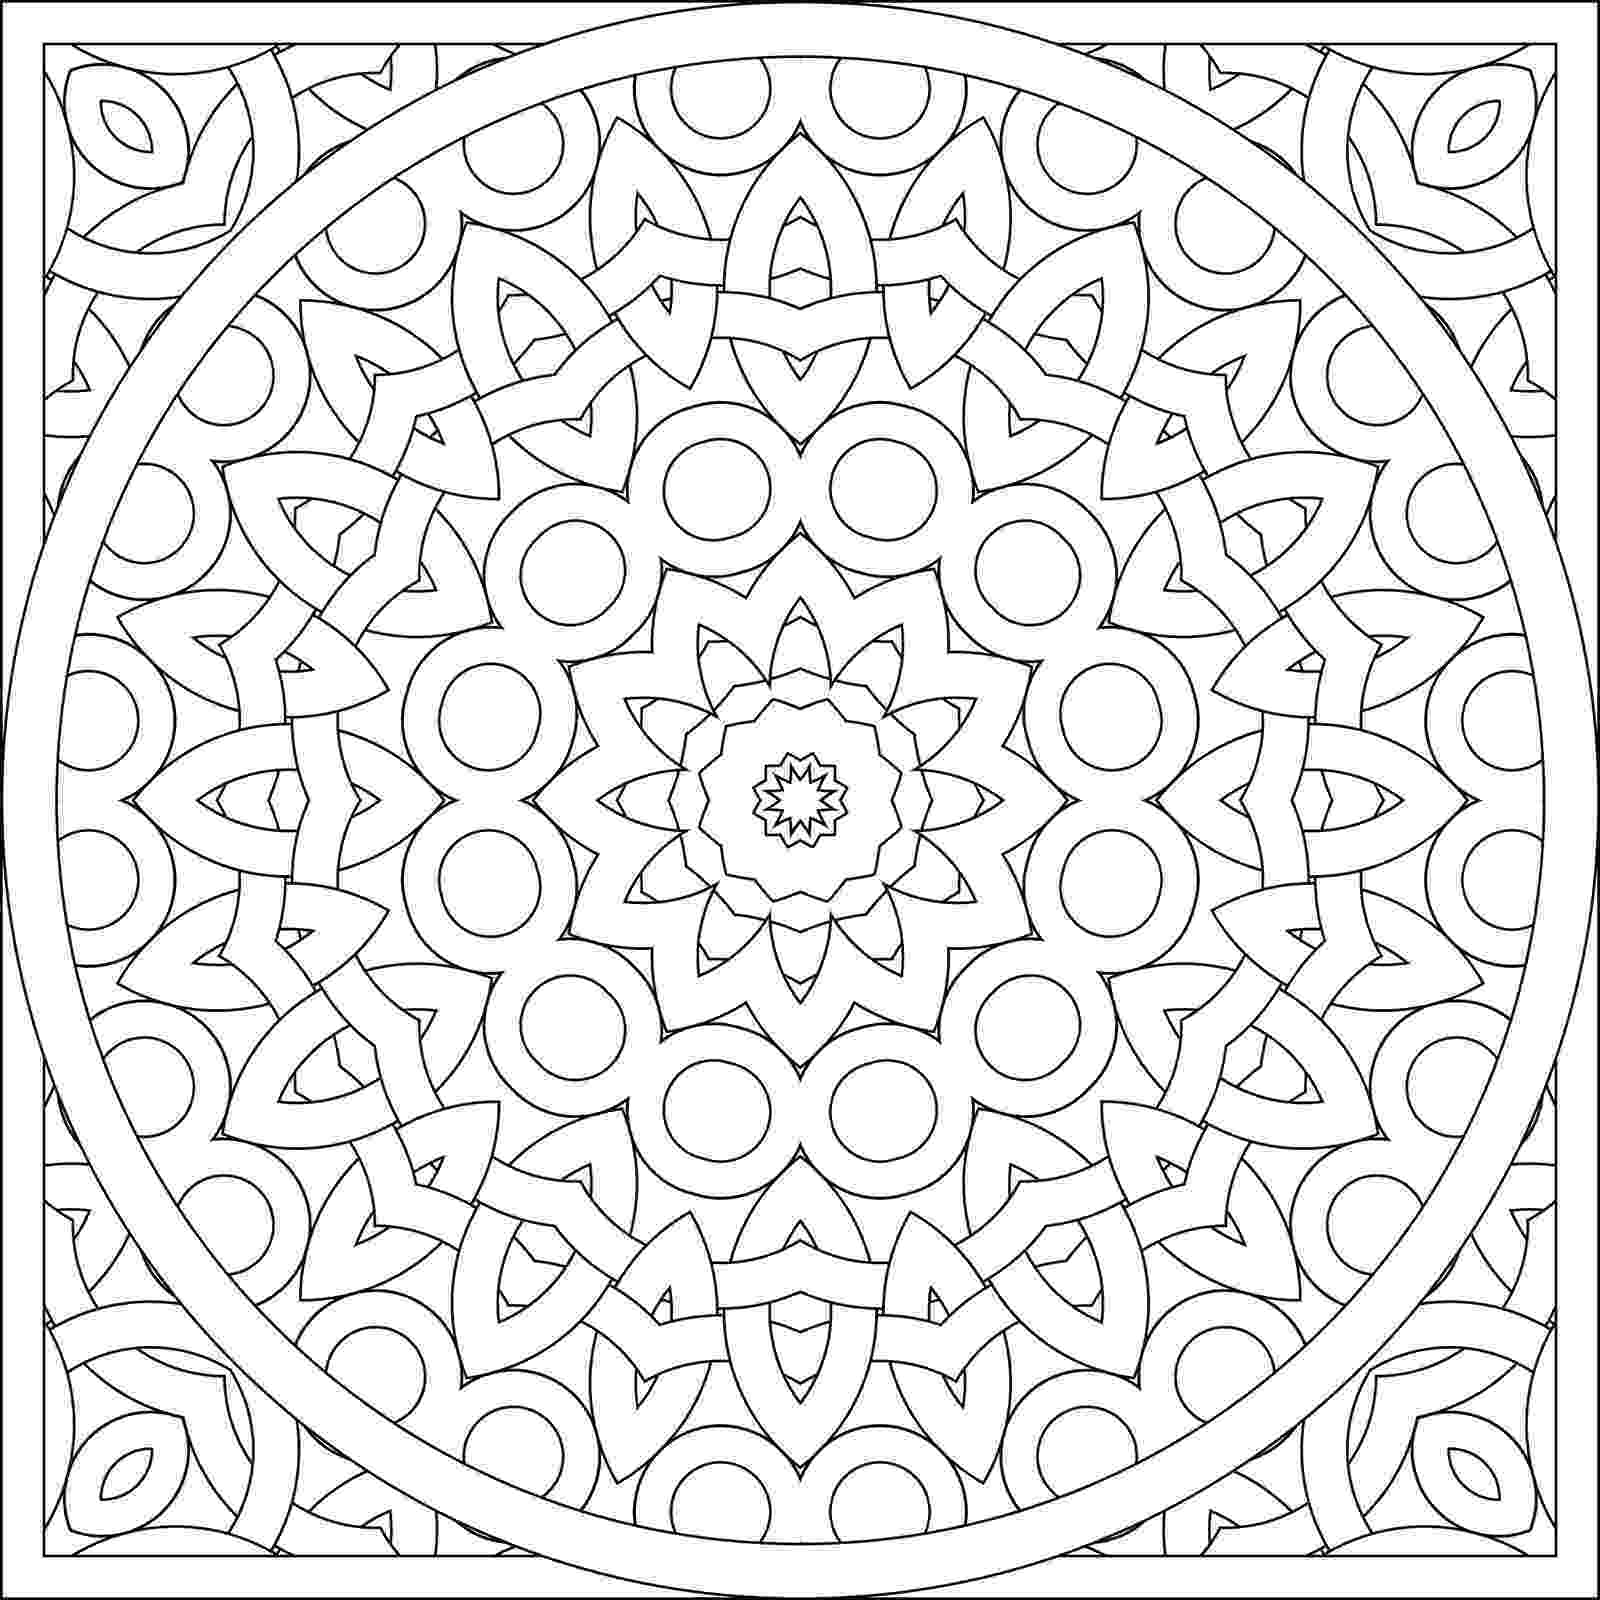 patterned coloring pages pattern coloring pages best coloring pages for kids patterned coloring pages 